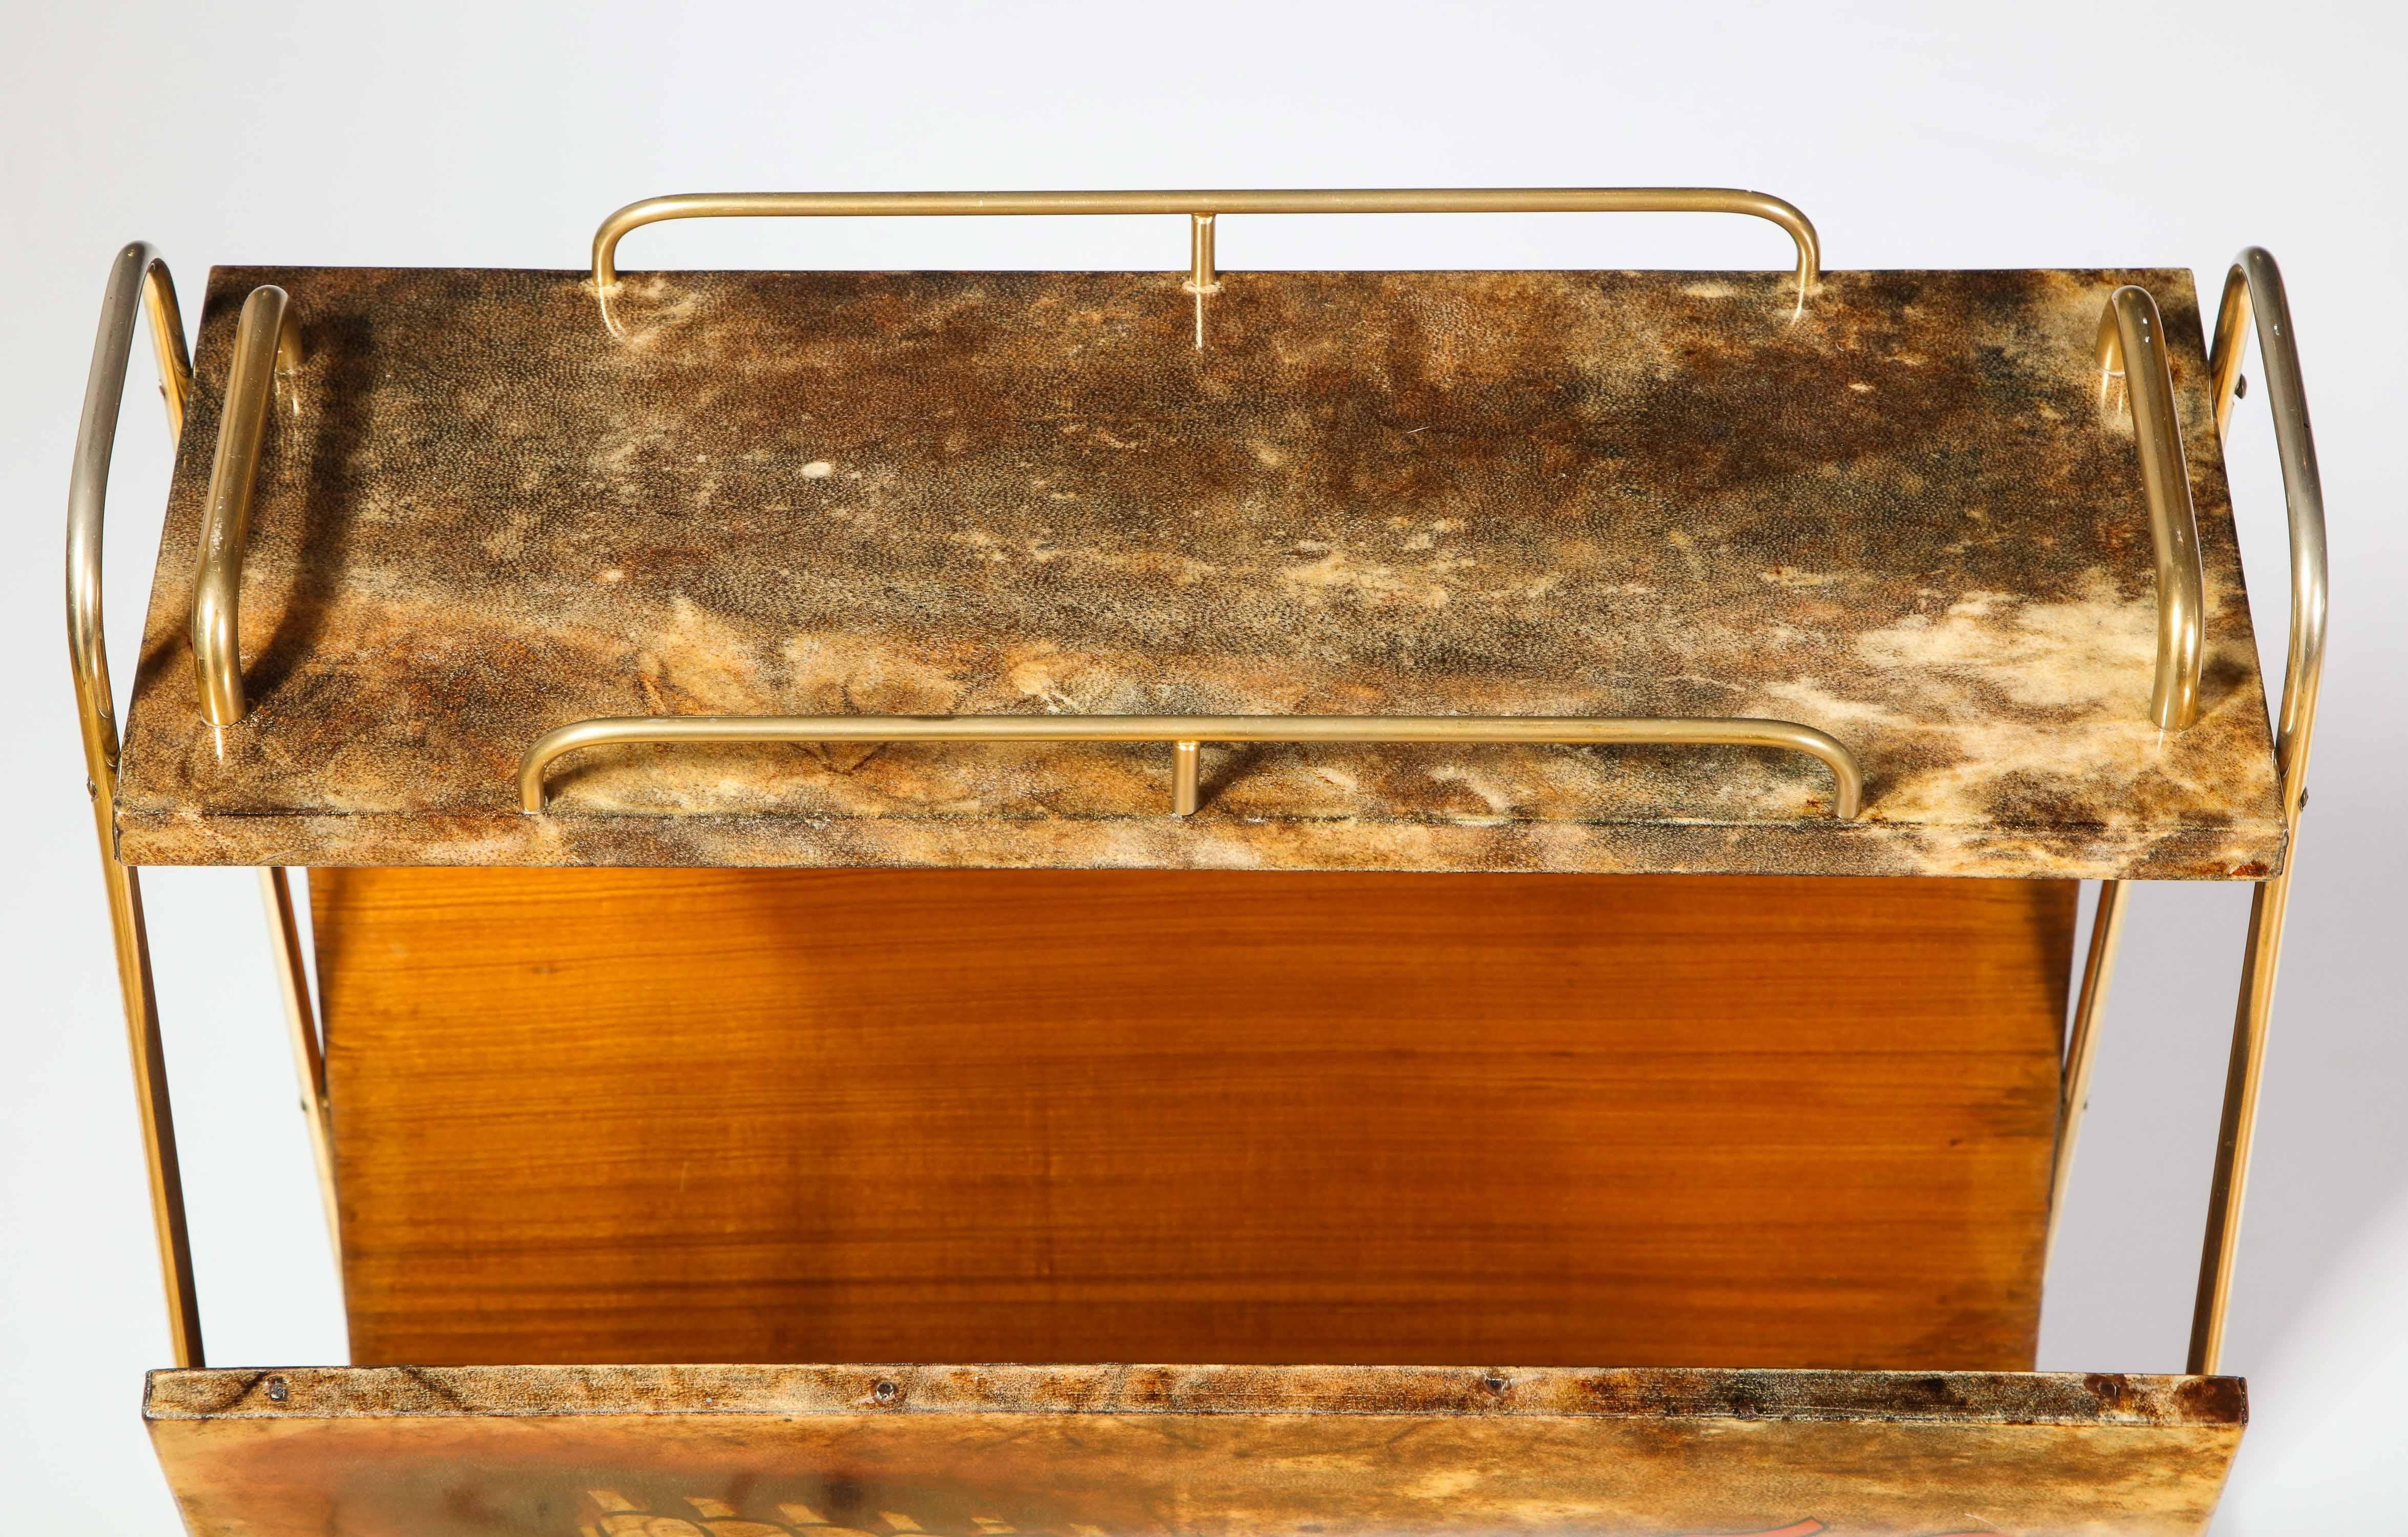 Magazine Stand by Aldo Tura, Goat Skin Parchment, Midcentury Italian, C 1950 In Good Condition For Sale In New York, NY